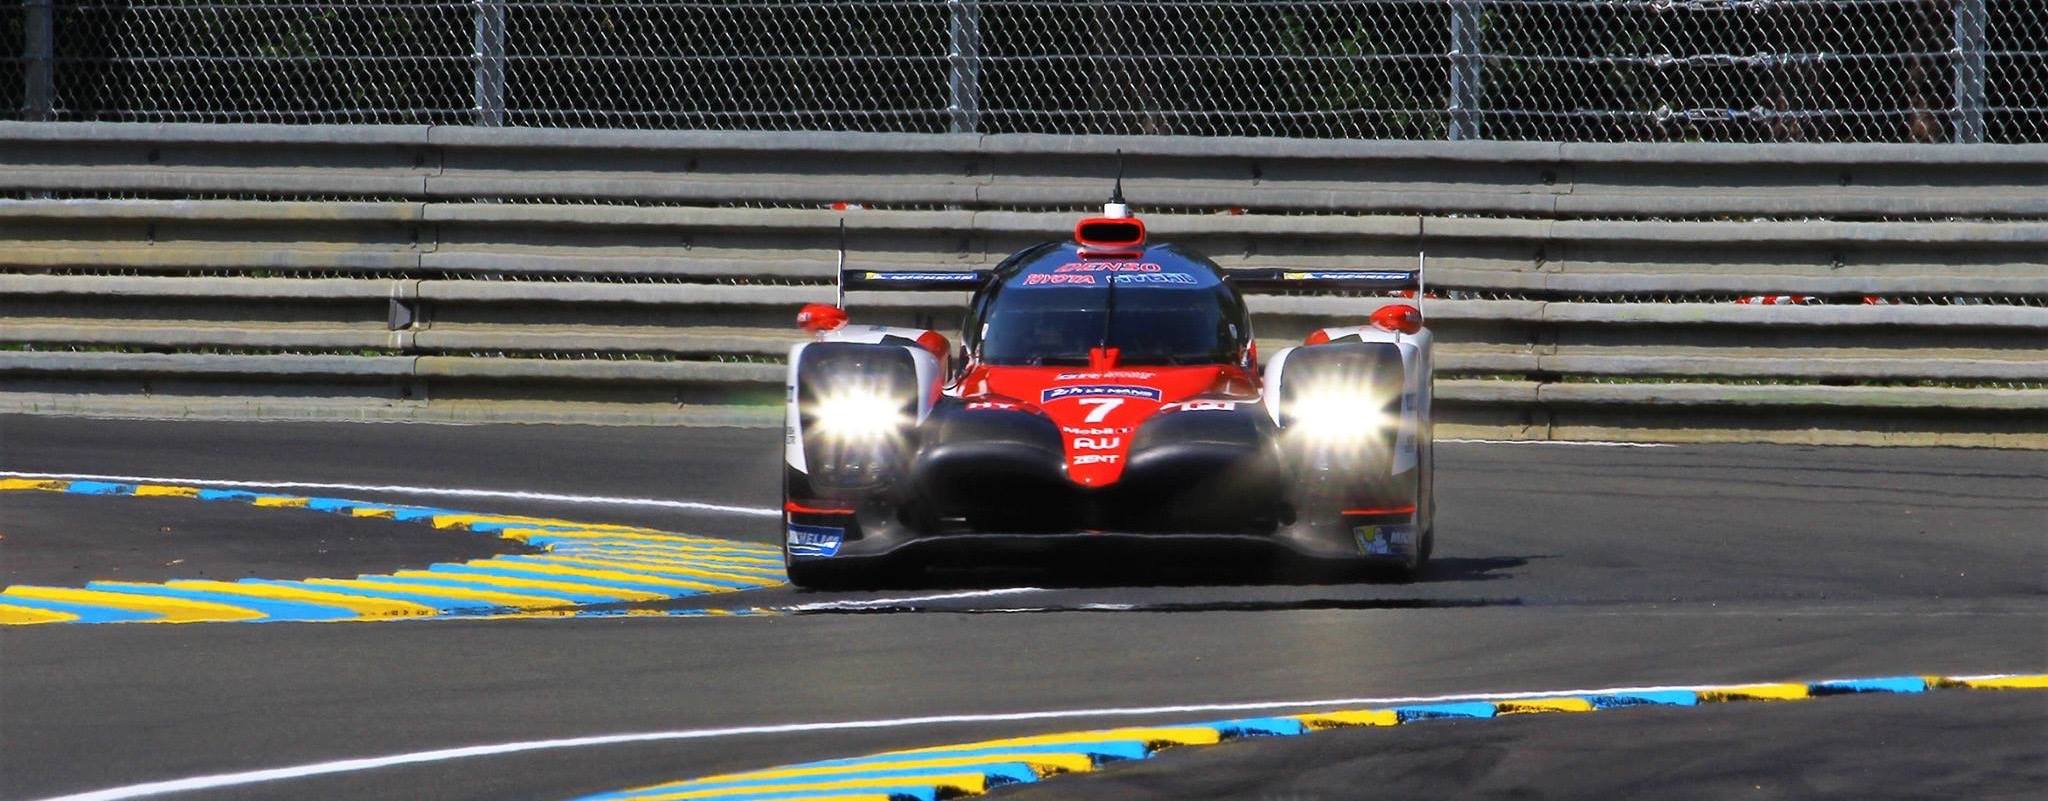 Toyota fastest in first qualifying session